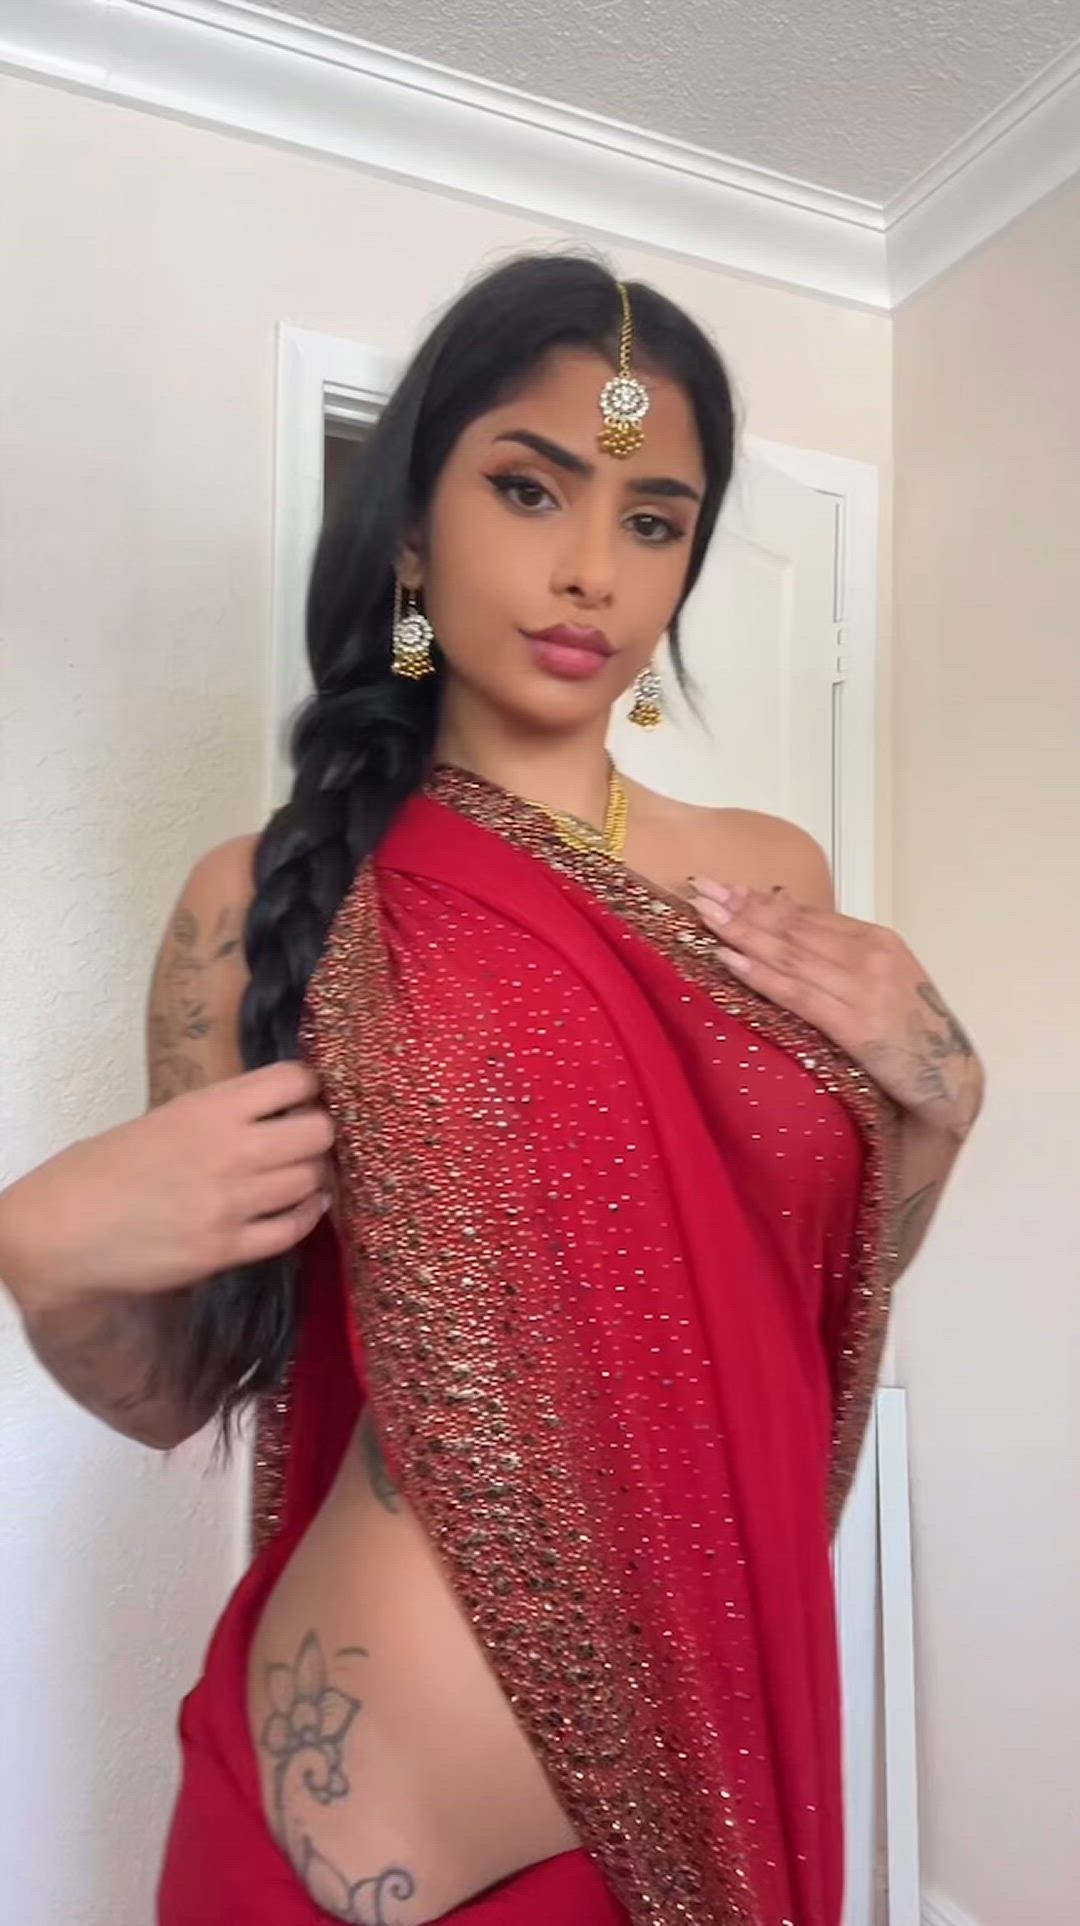 Big Tits porn video with onlyfans model SLAYHIL <strong>@slayhil</strong>